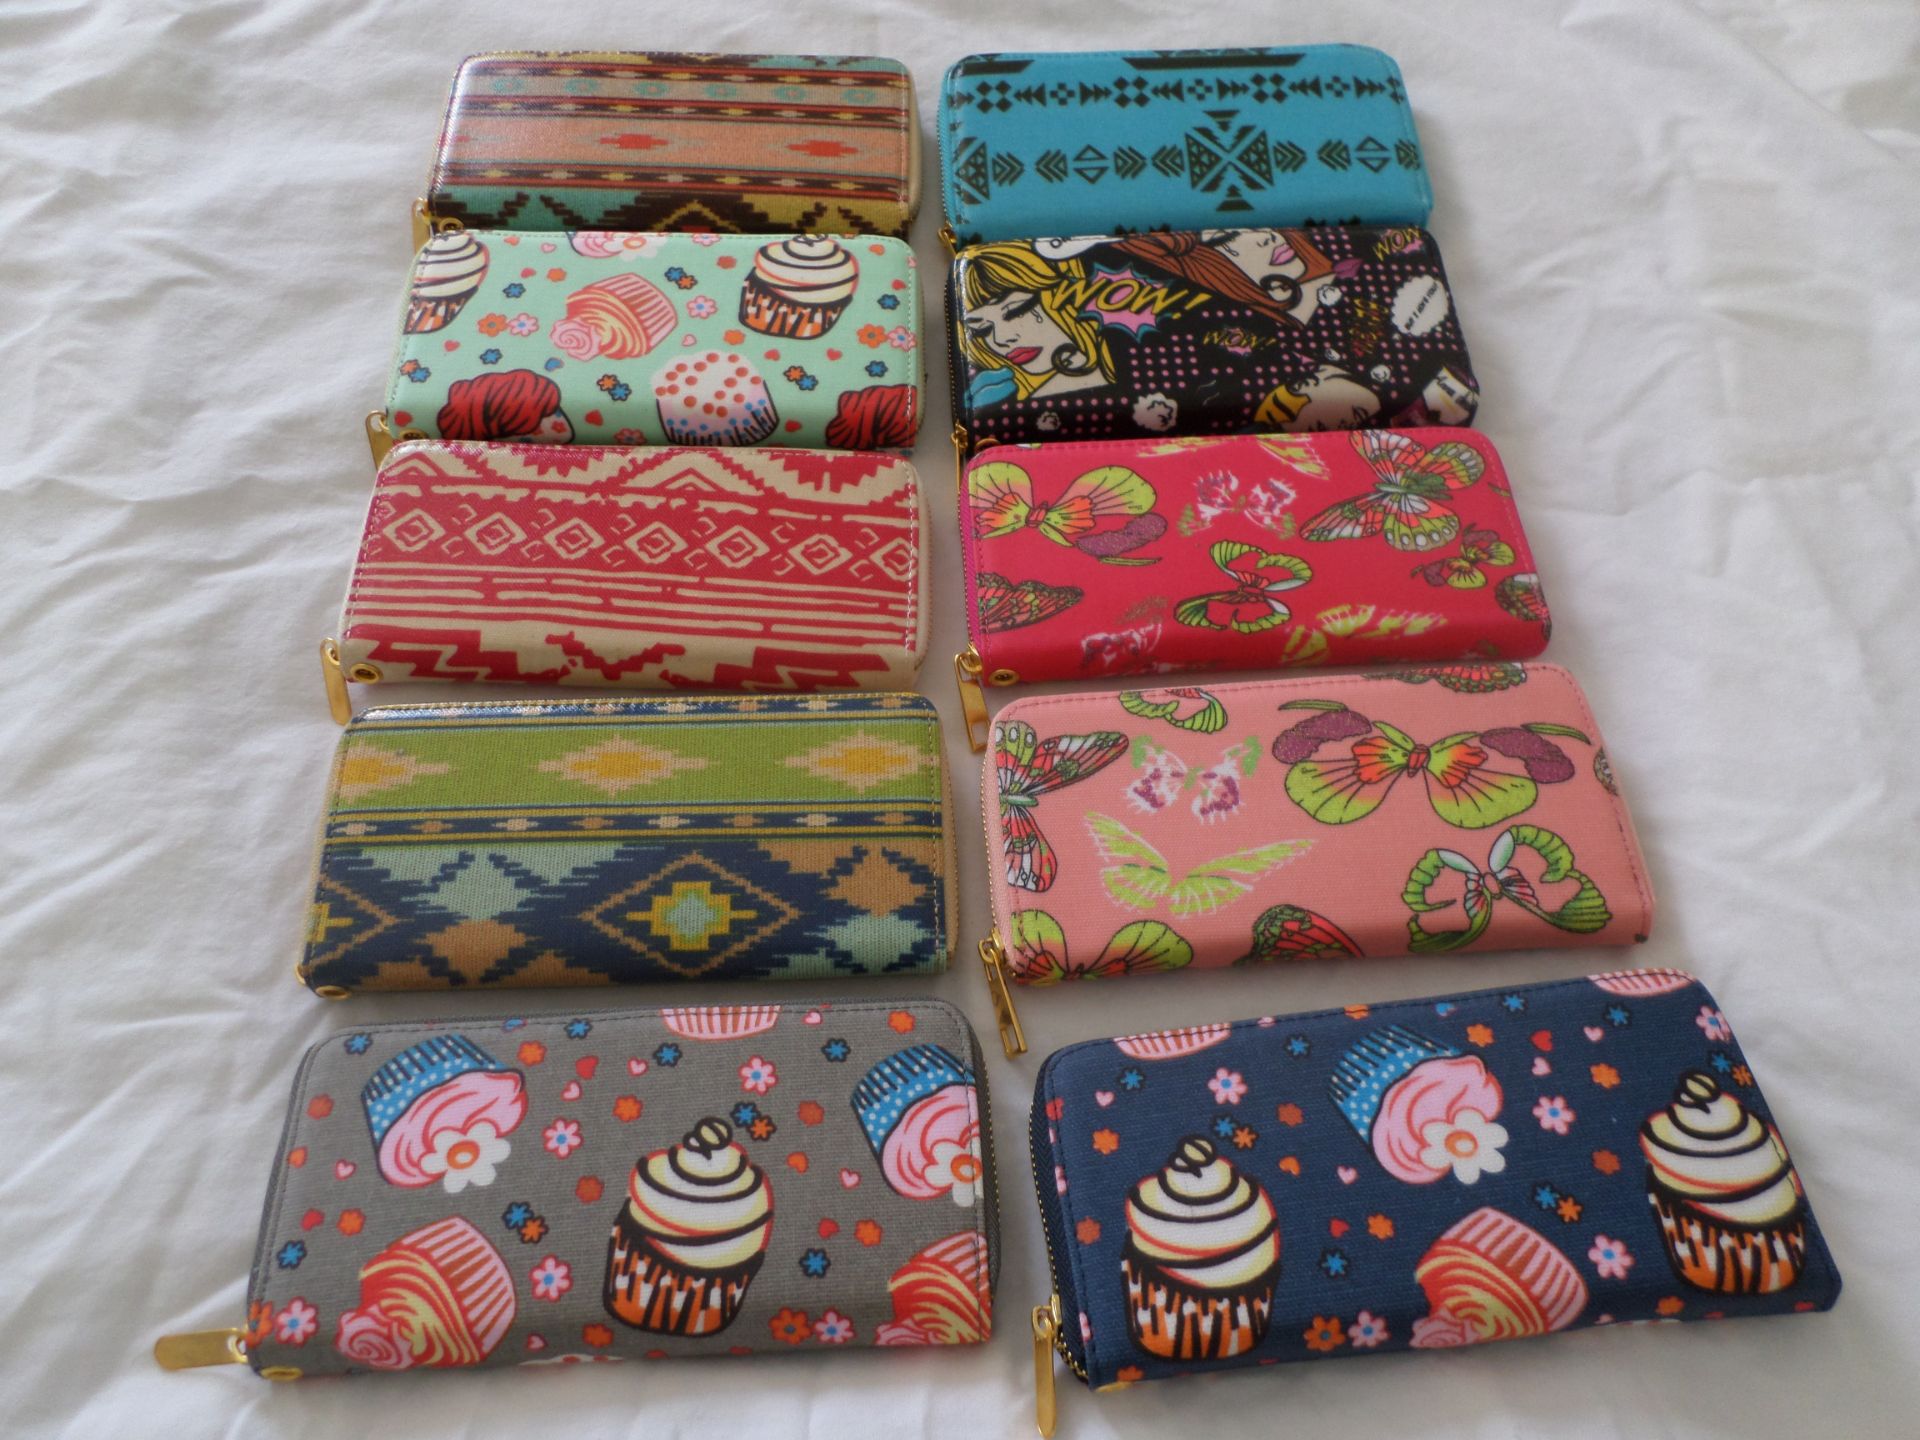 10 x Ladies Clutch/Purses RRP £14 Each. Brand New - Image 2 of 4